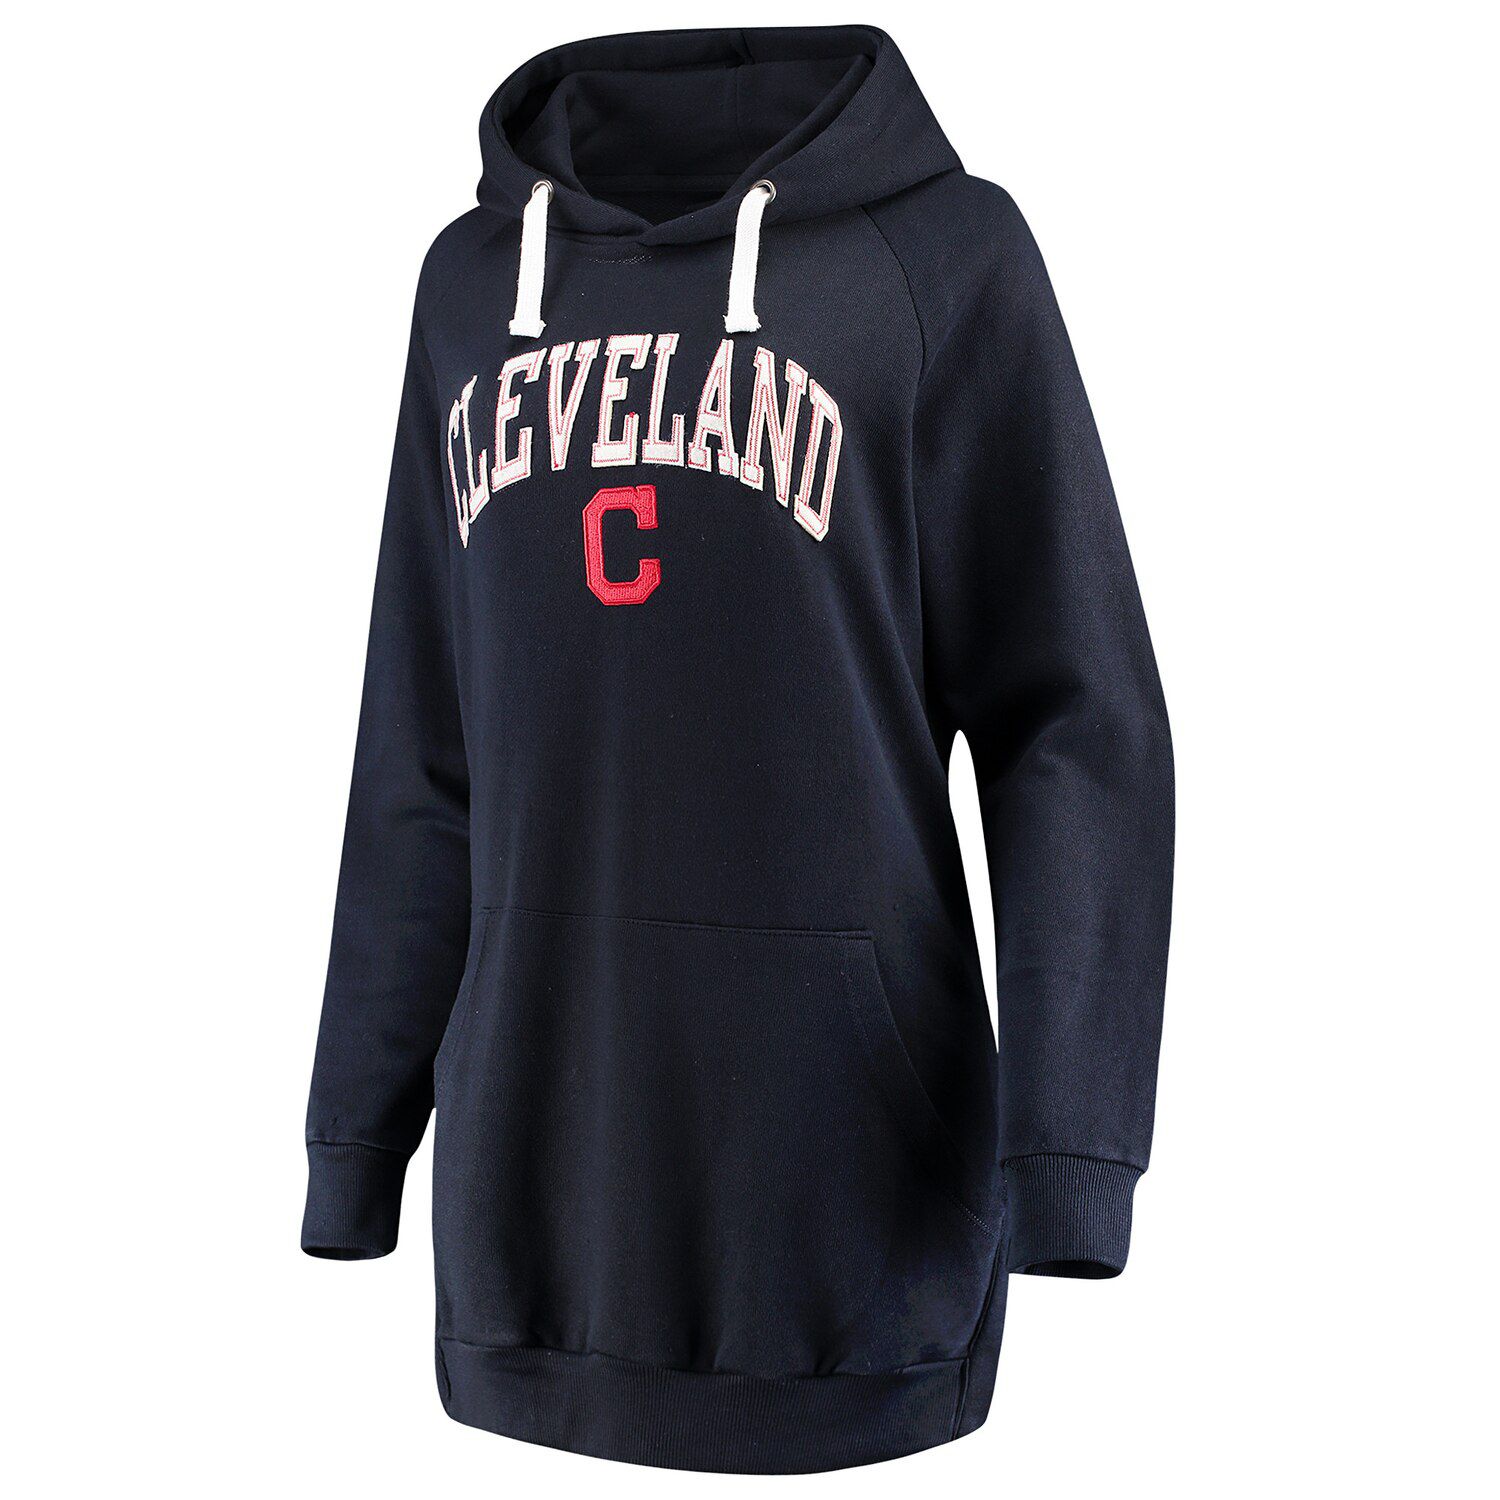 womens cleveland indians jersey